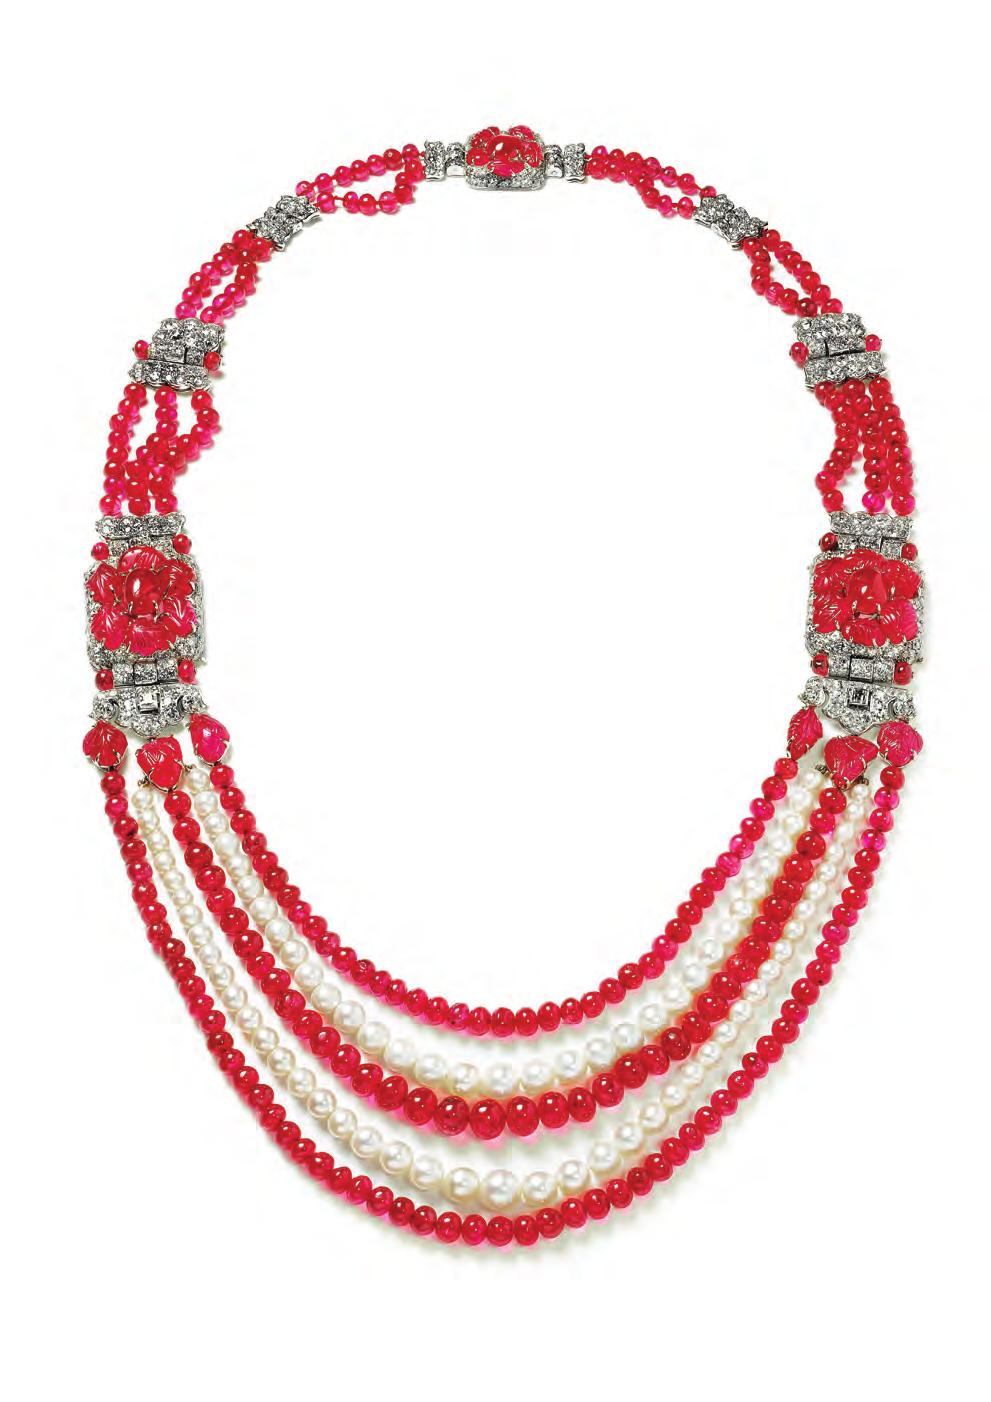 BOOK REVIEW Indian style necklace made by English Art Works for Cartier London and commissioned in 1930